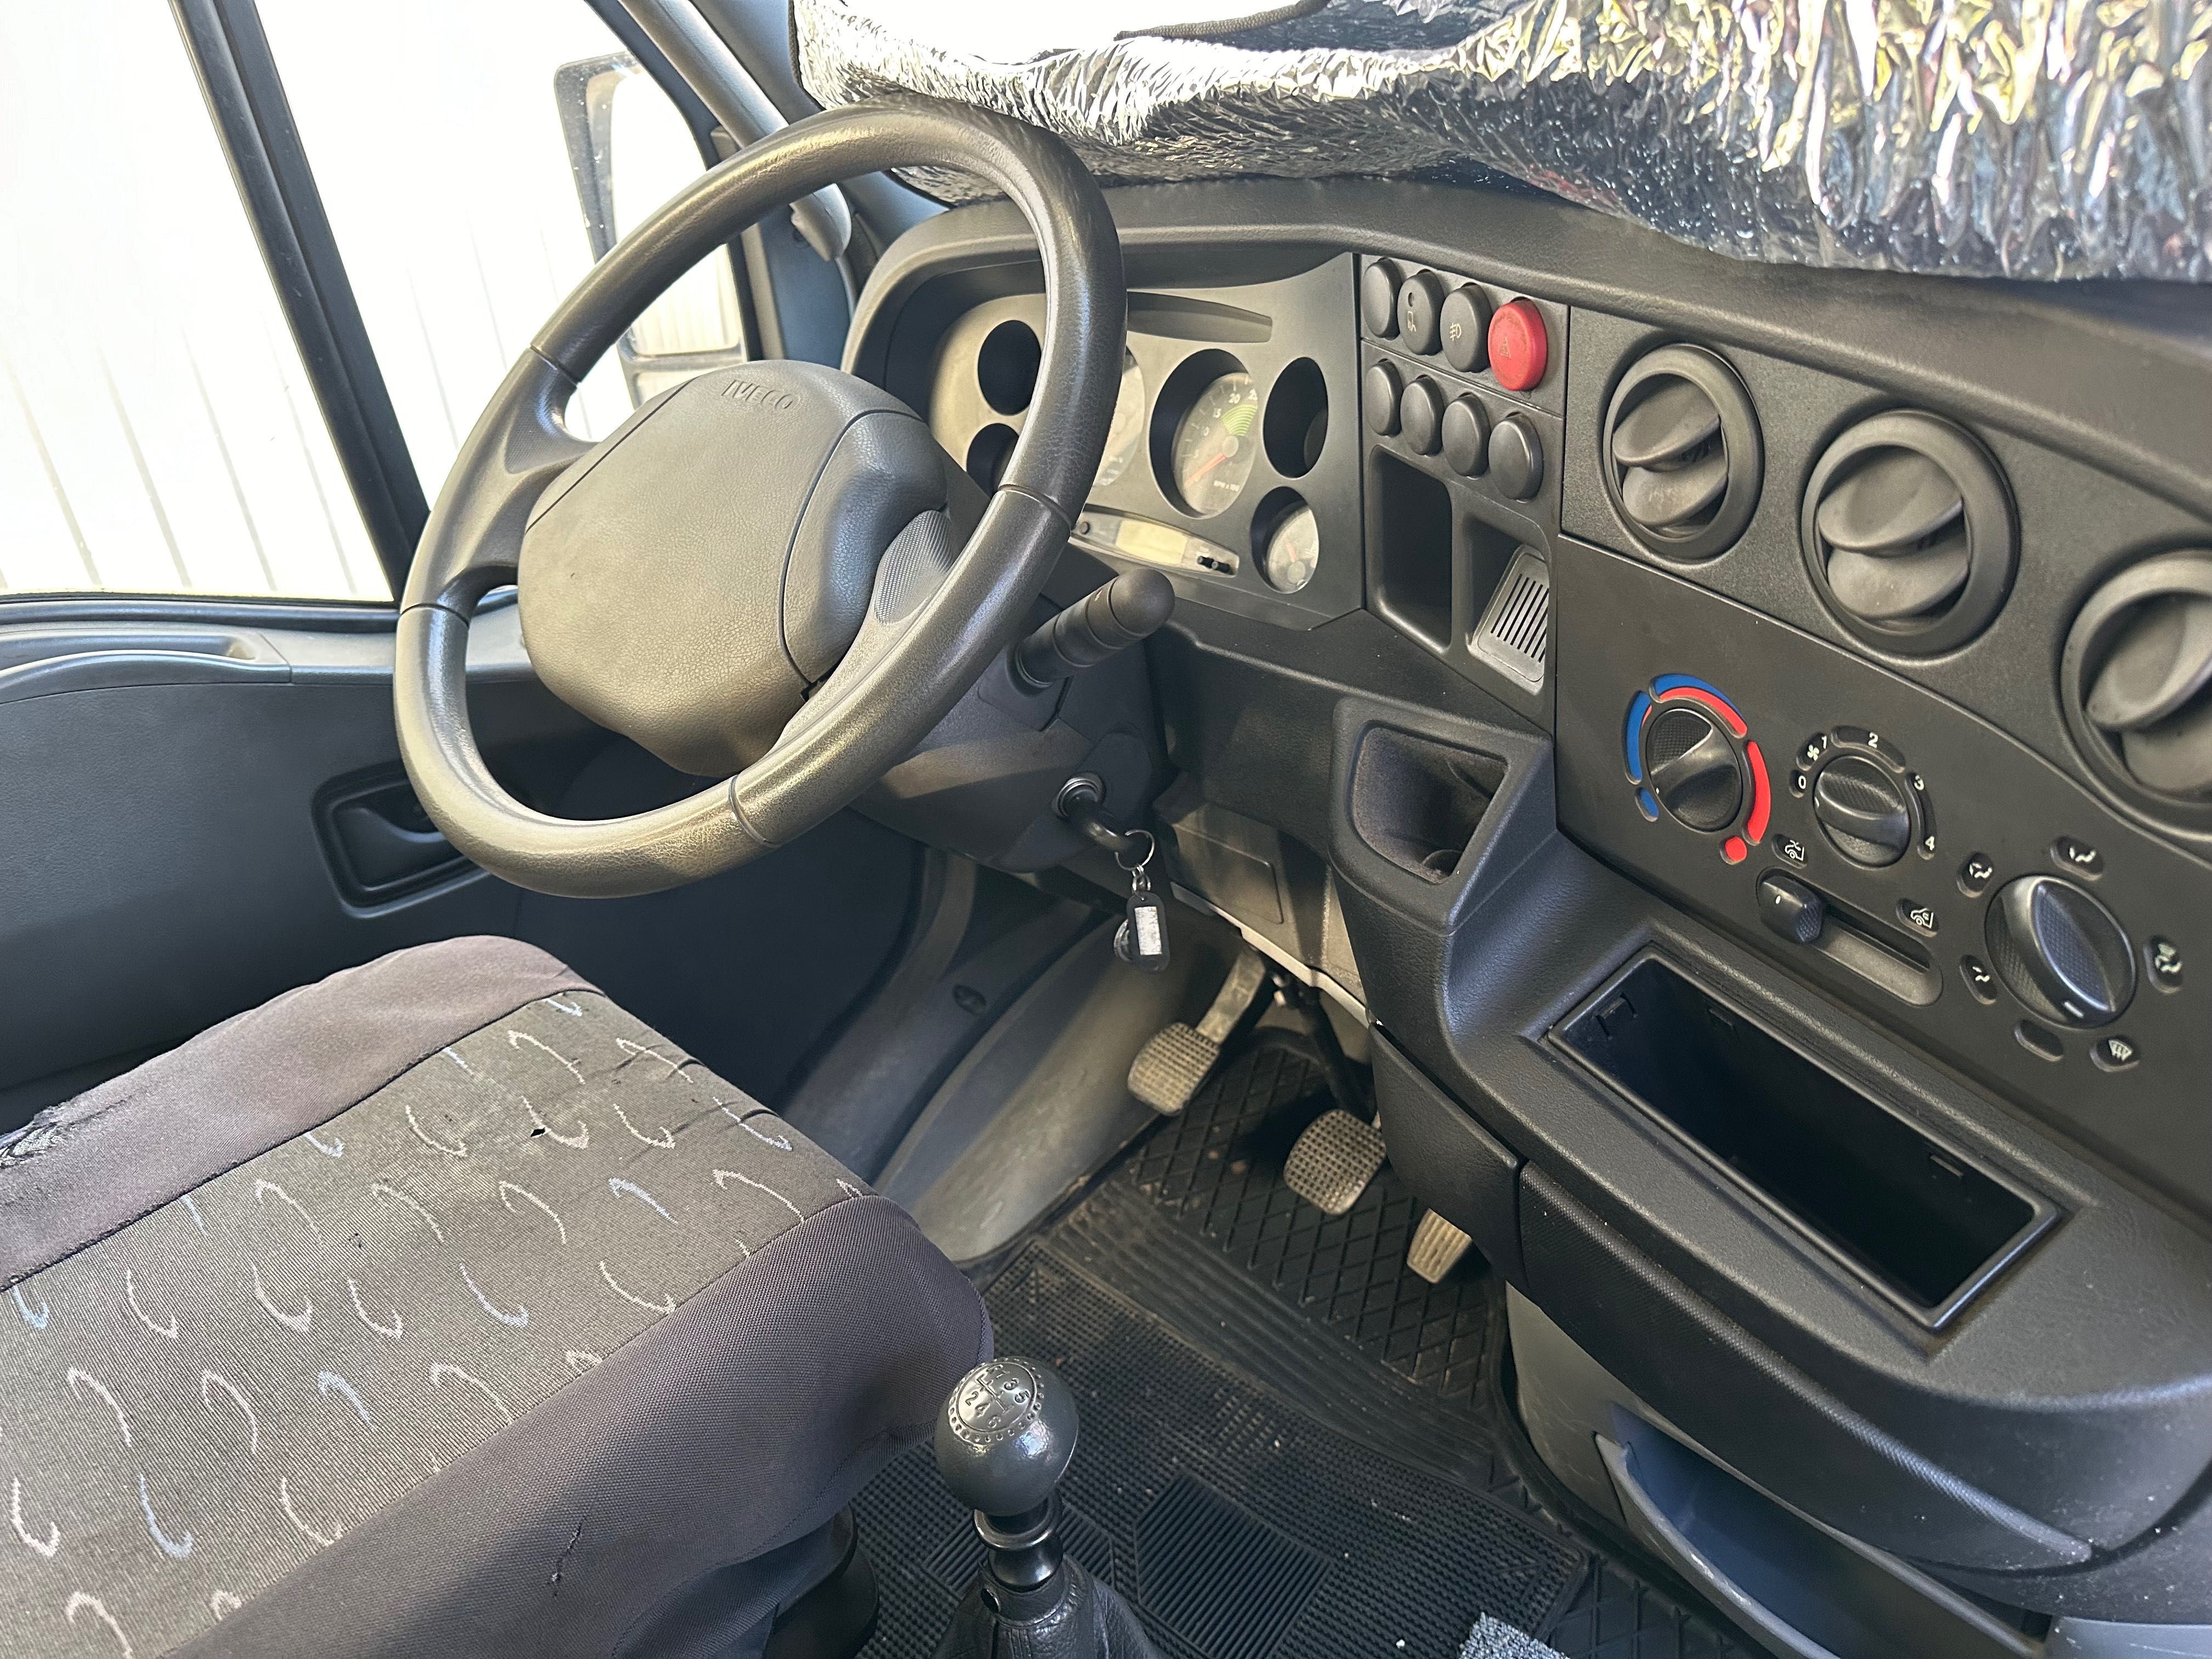 Iveco Daily 6.5 tone